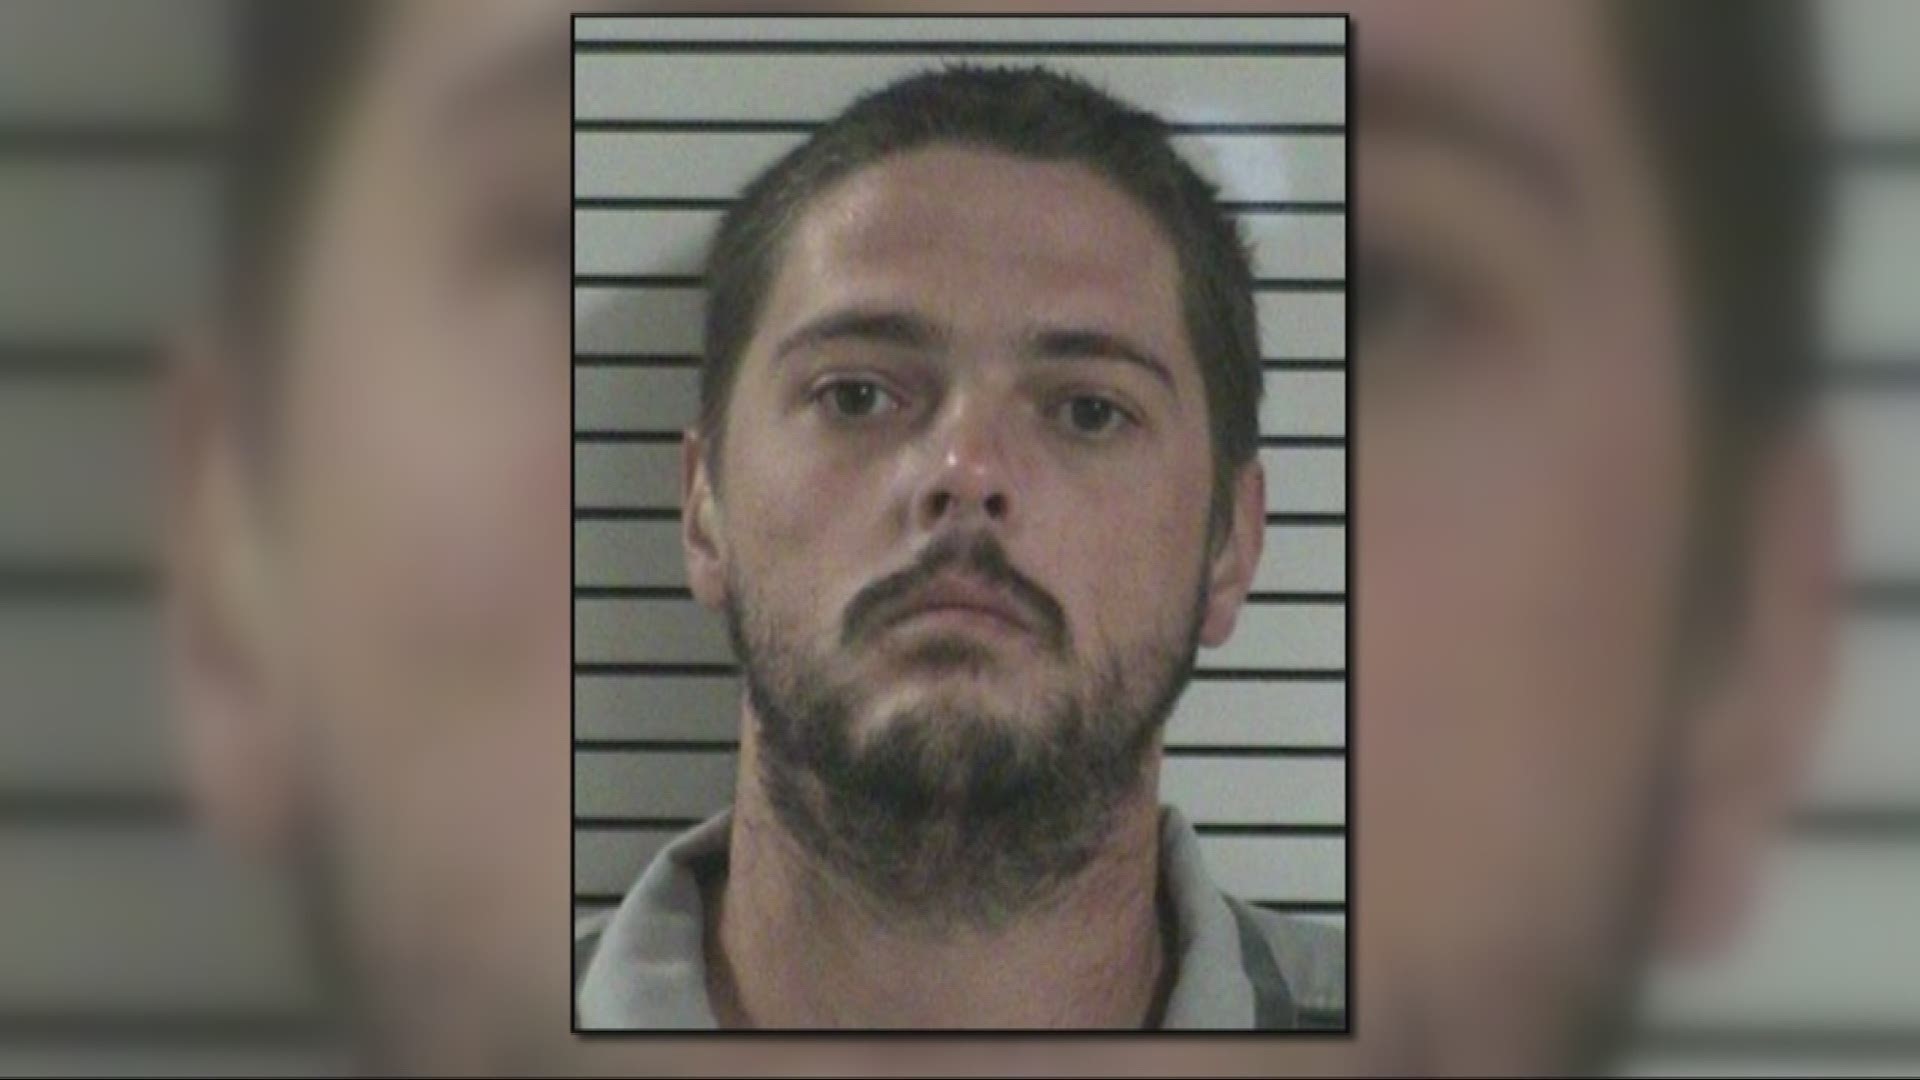 Iredell County man arrested on sexual assault charges | wcnc.com